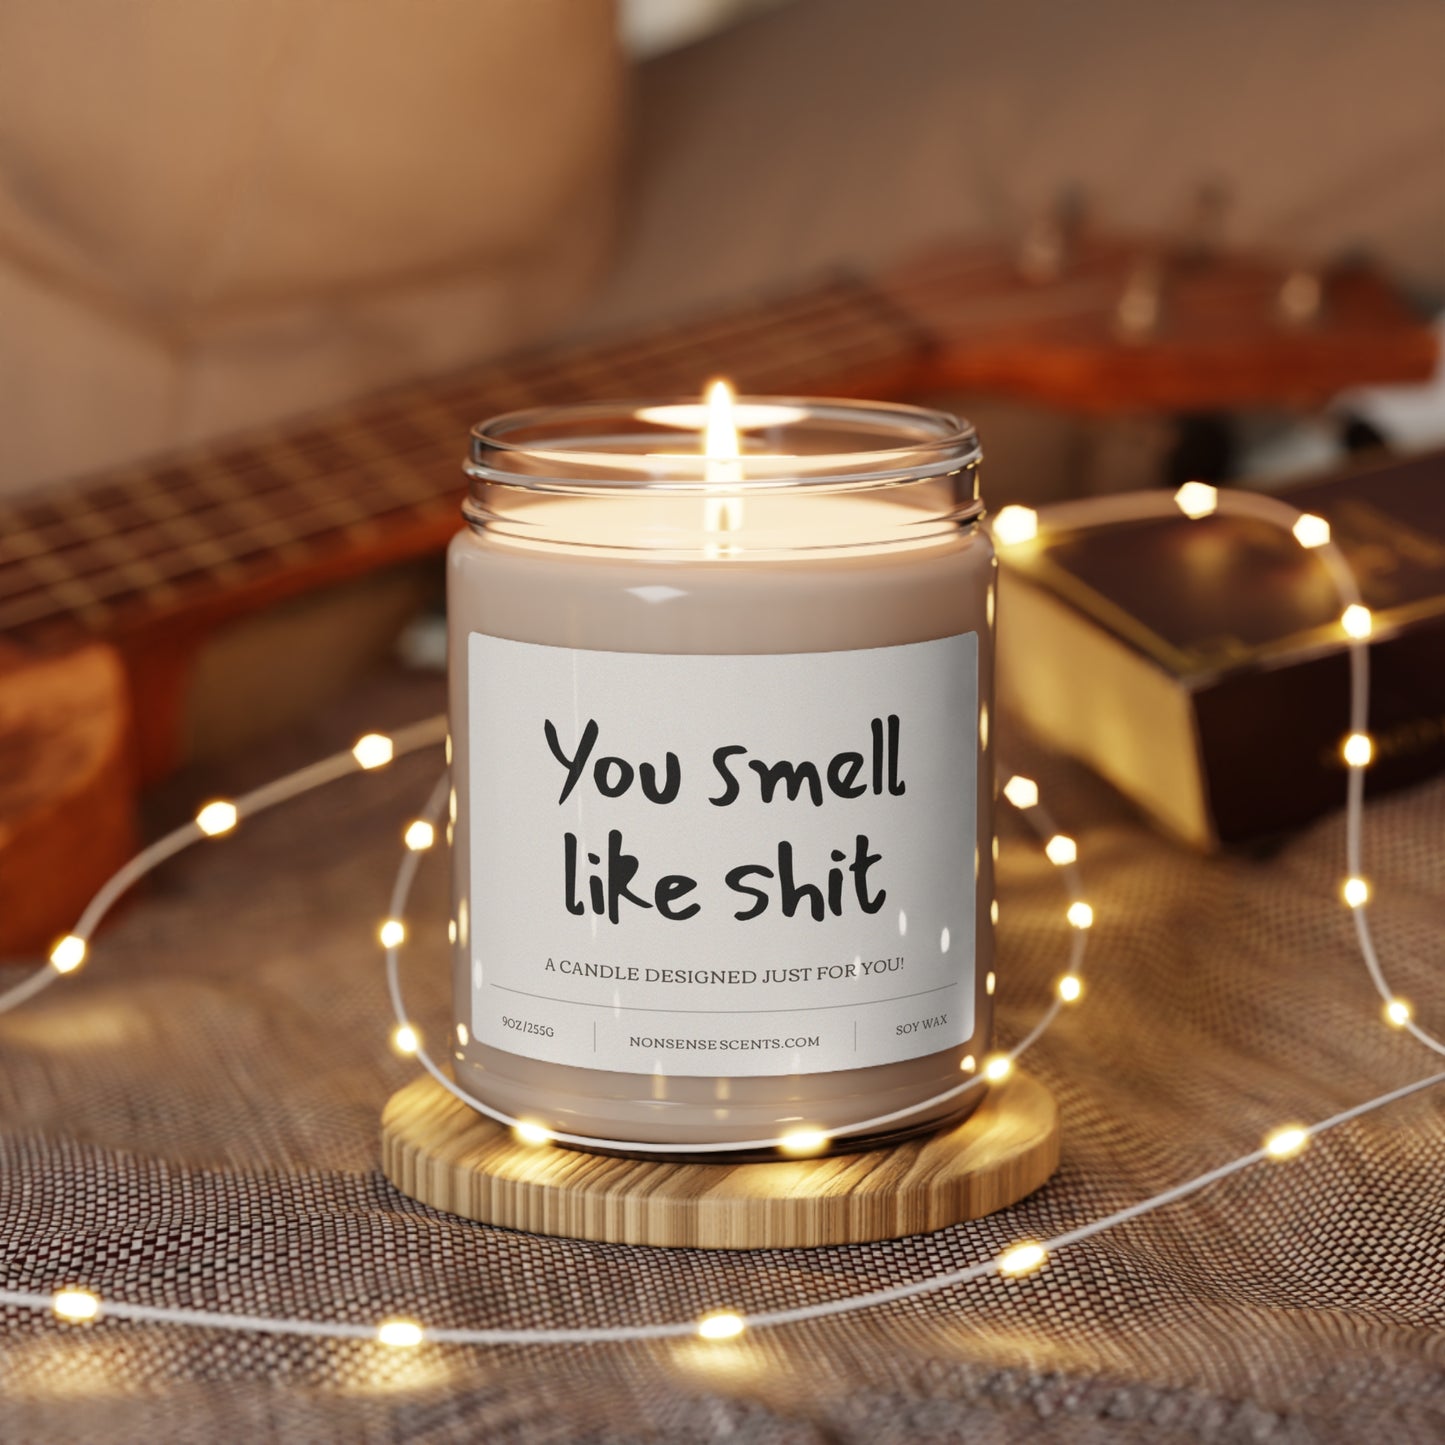 "You Smell Like Shit" Scented Candle